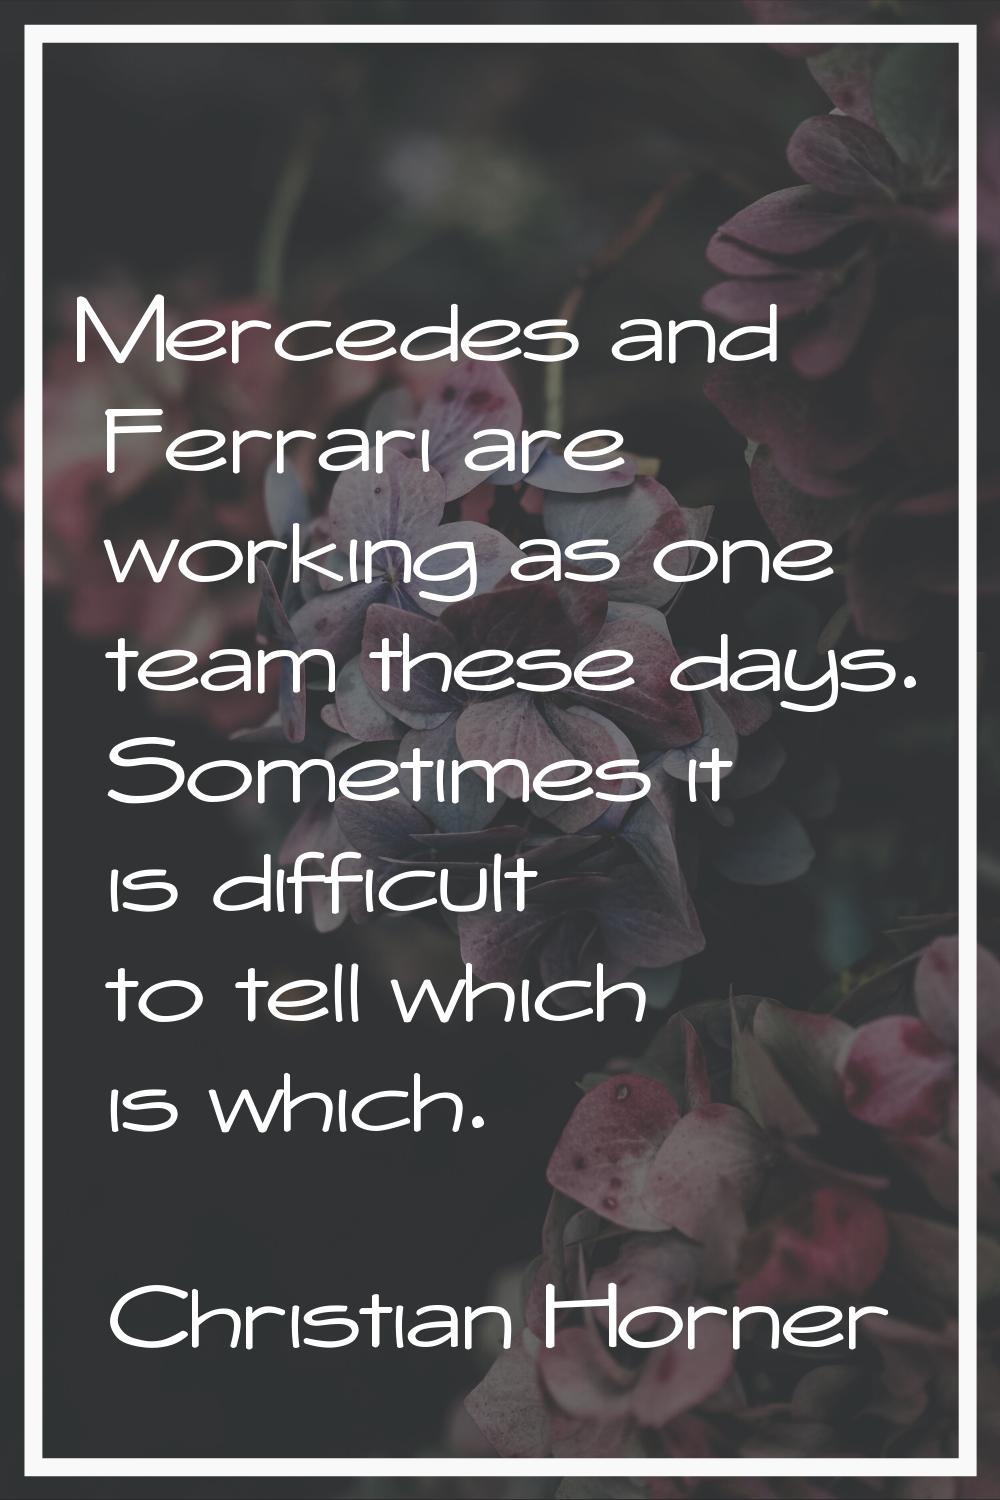 Mercedes and Ferrari are working as one team these days. Sometimes it is difficult to tell which is